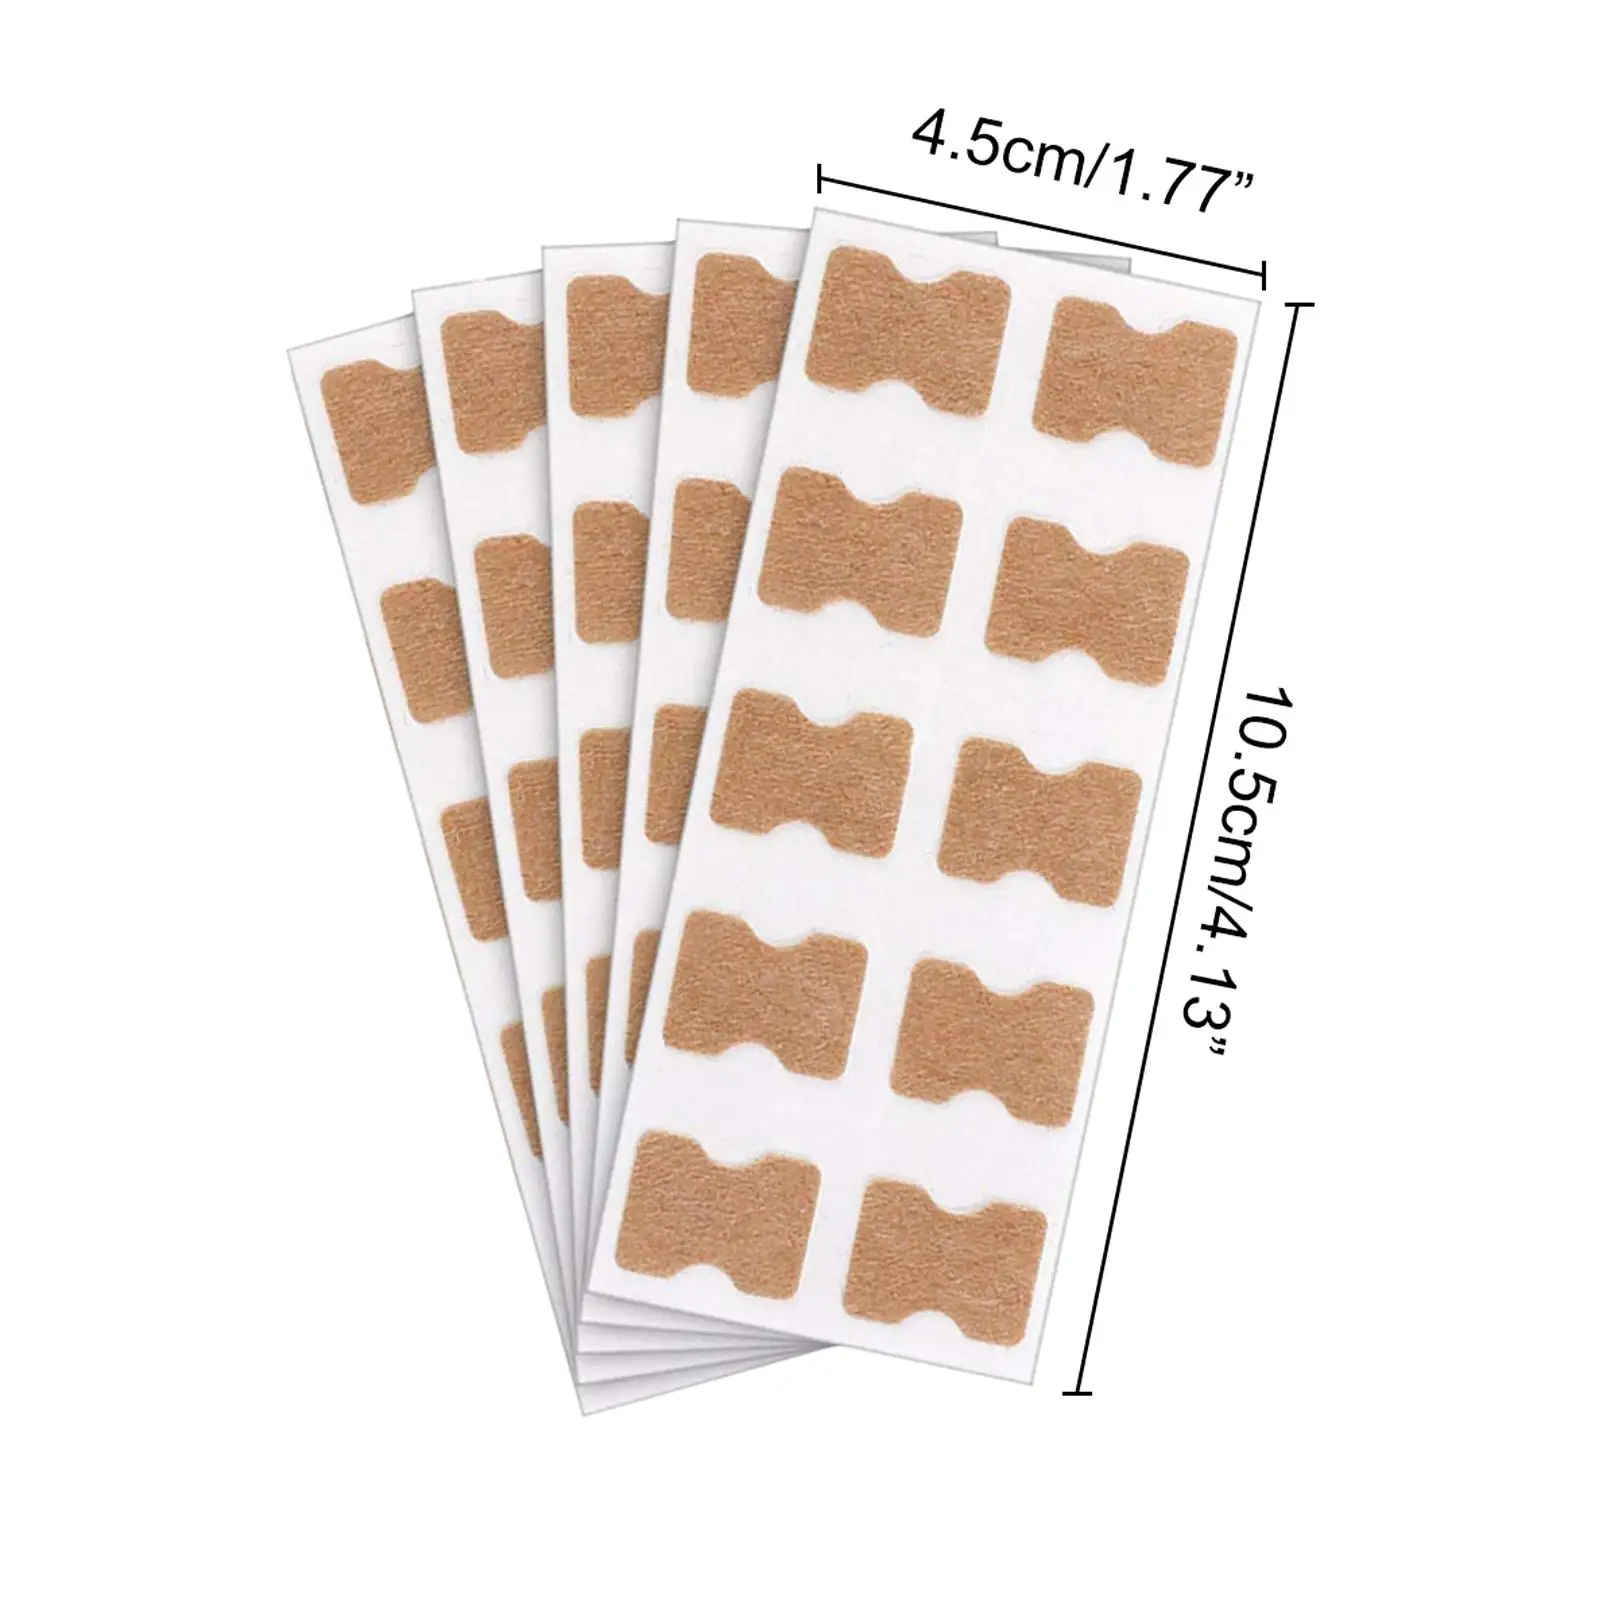 50x Elastic Ingrown Toenail Correction Patch Pedicure Tool Self Adhesive Breathable Glue Free Toenail Patch for Salon Home